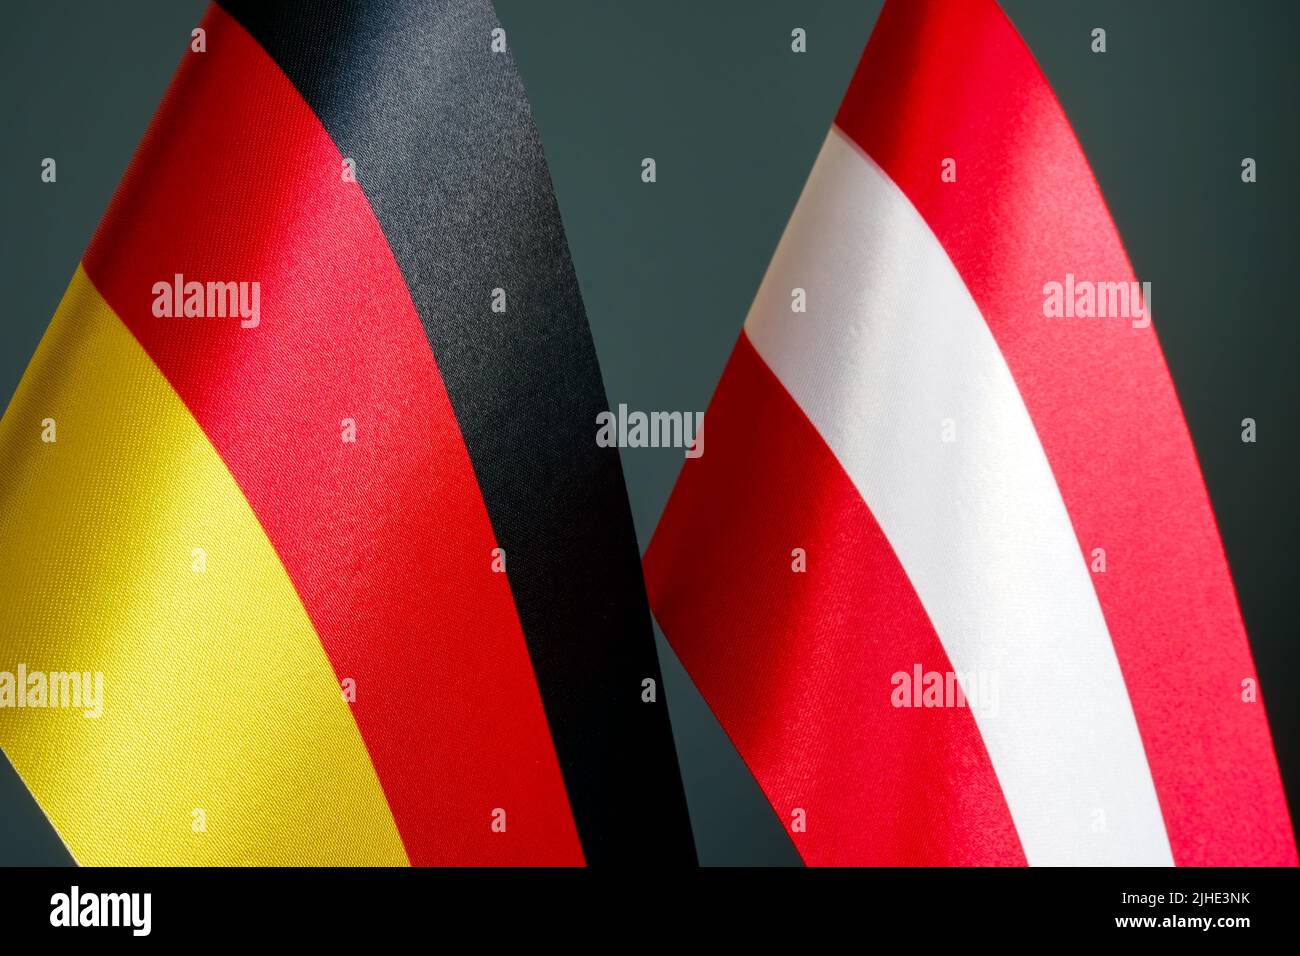 Small flags of Germany and Austria side by side. Stock Photo